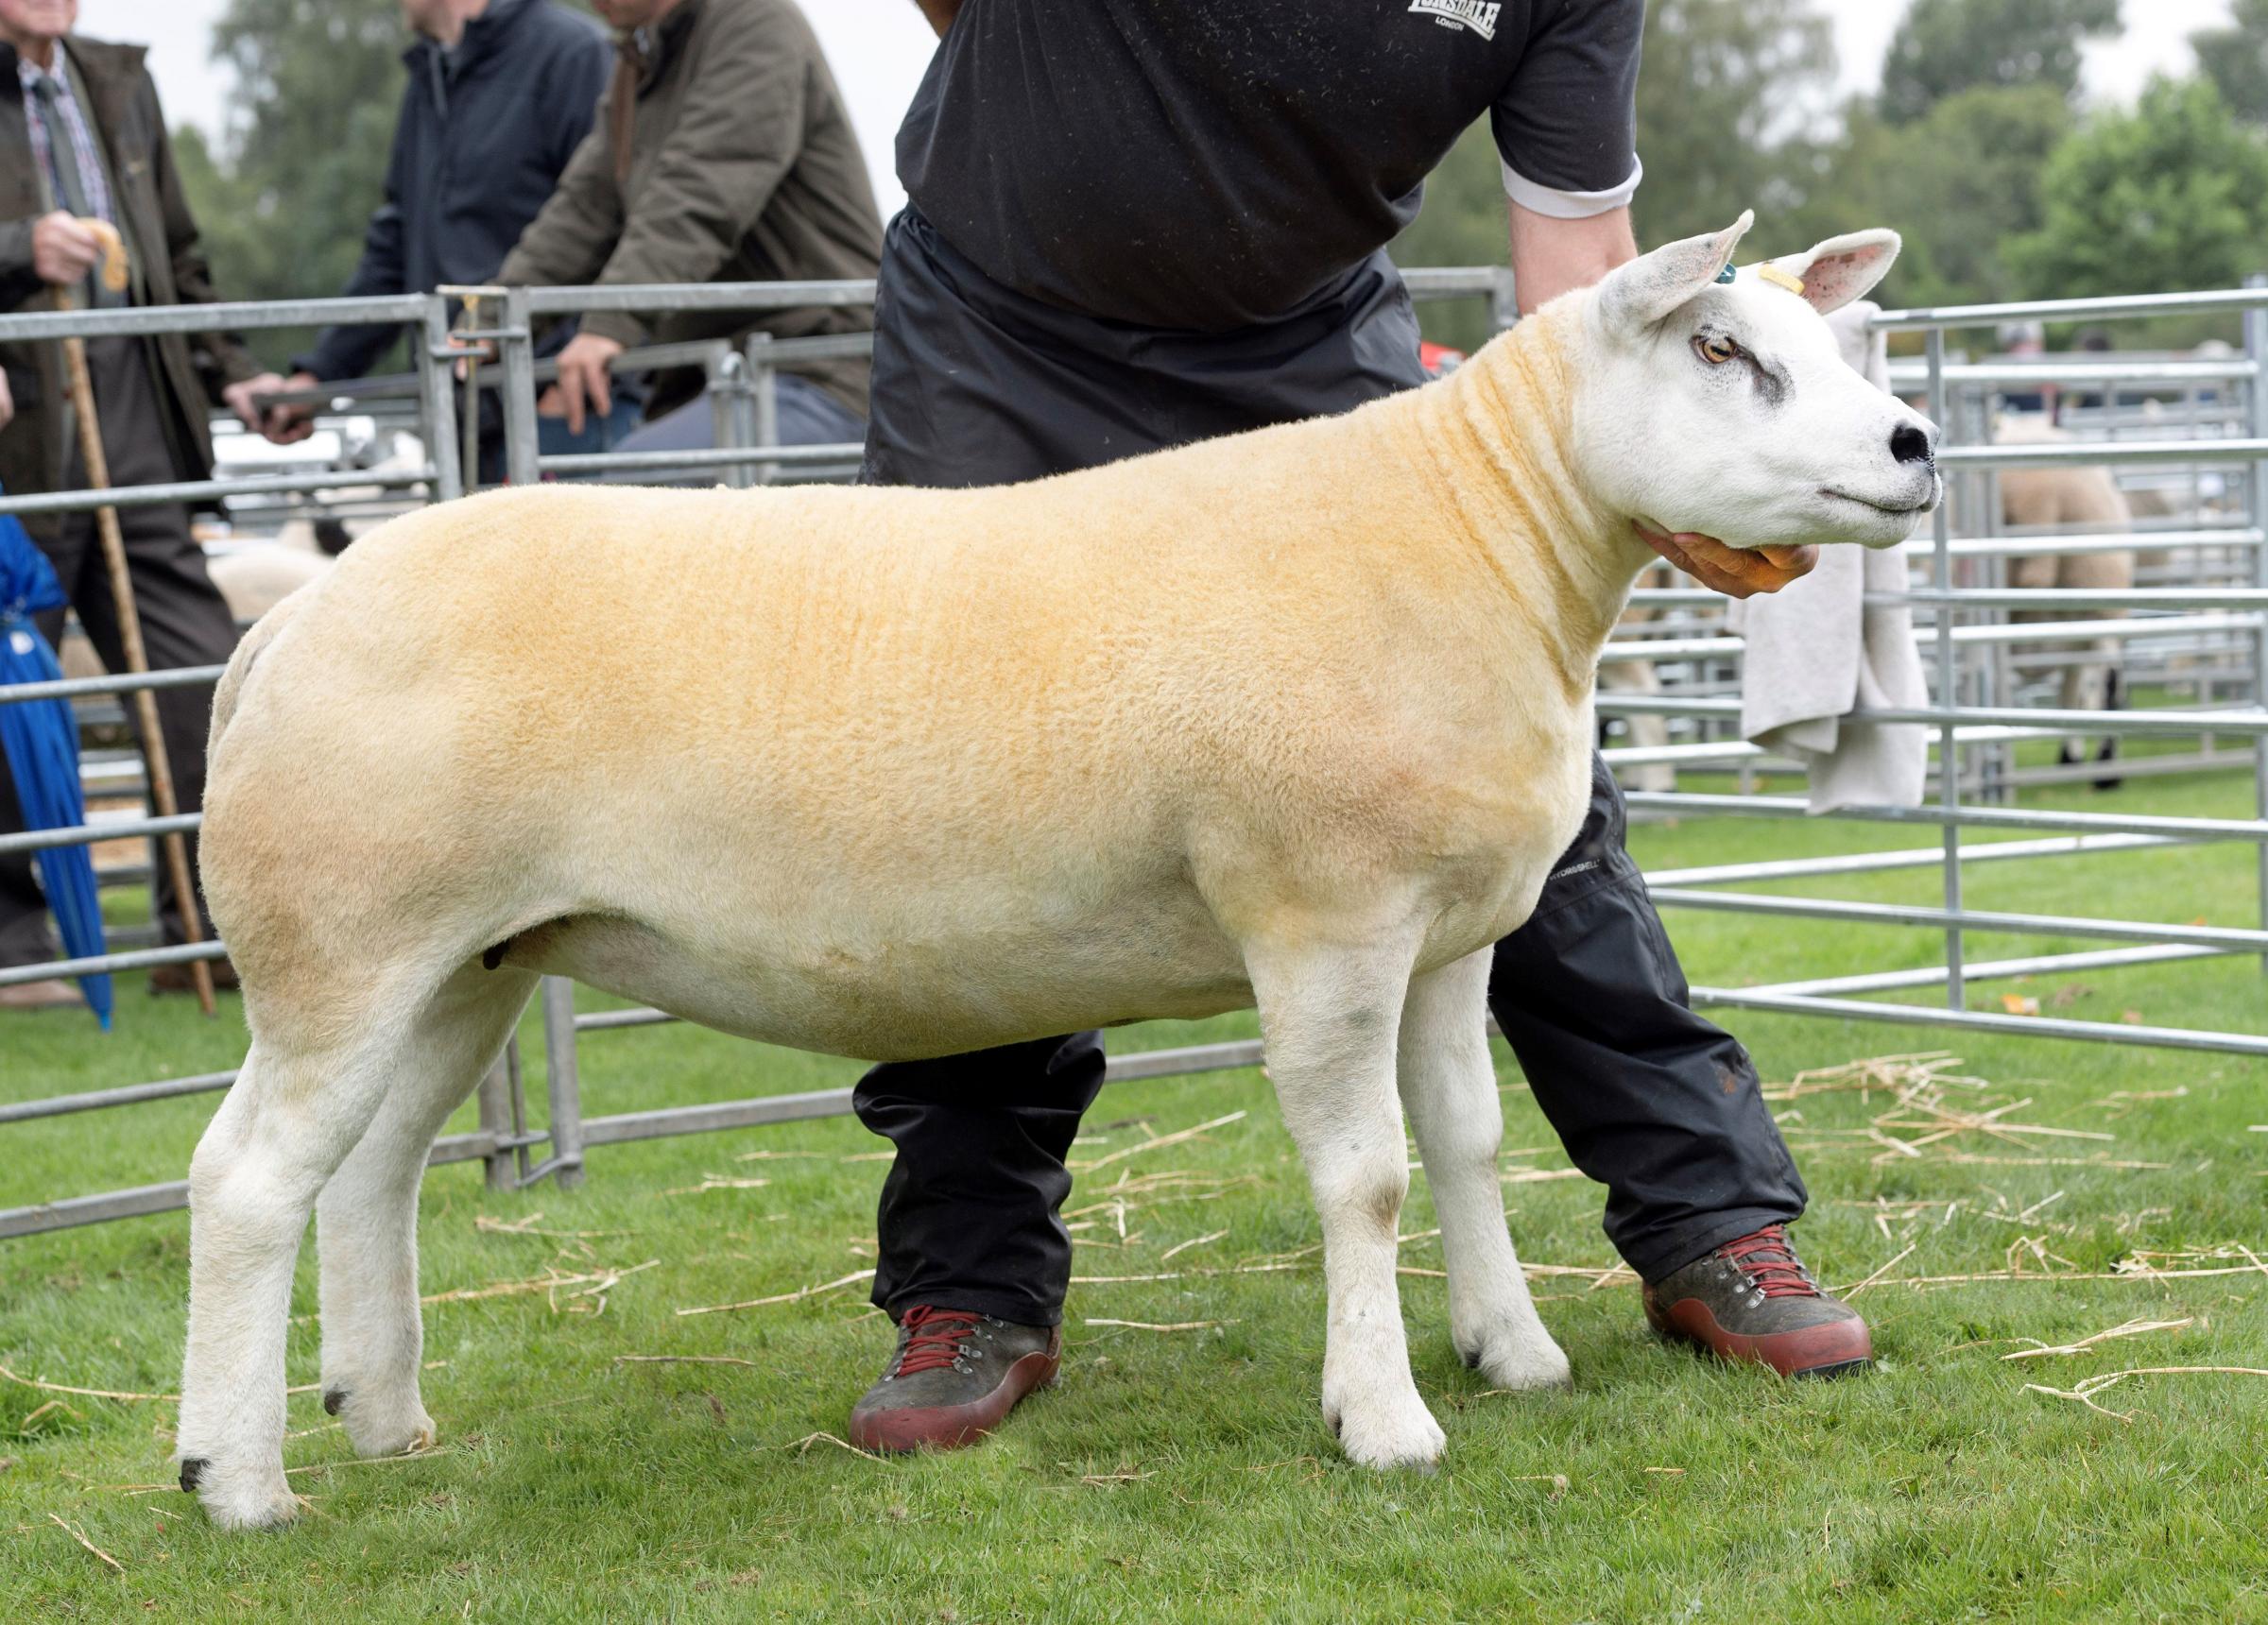 Texel champion and inter-breed sheep was Robert Cockburns Texel gimmer